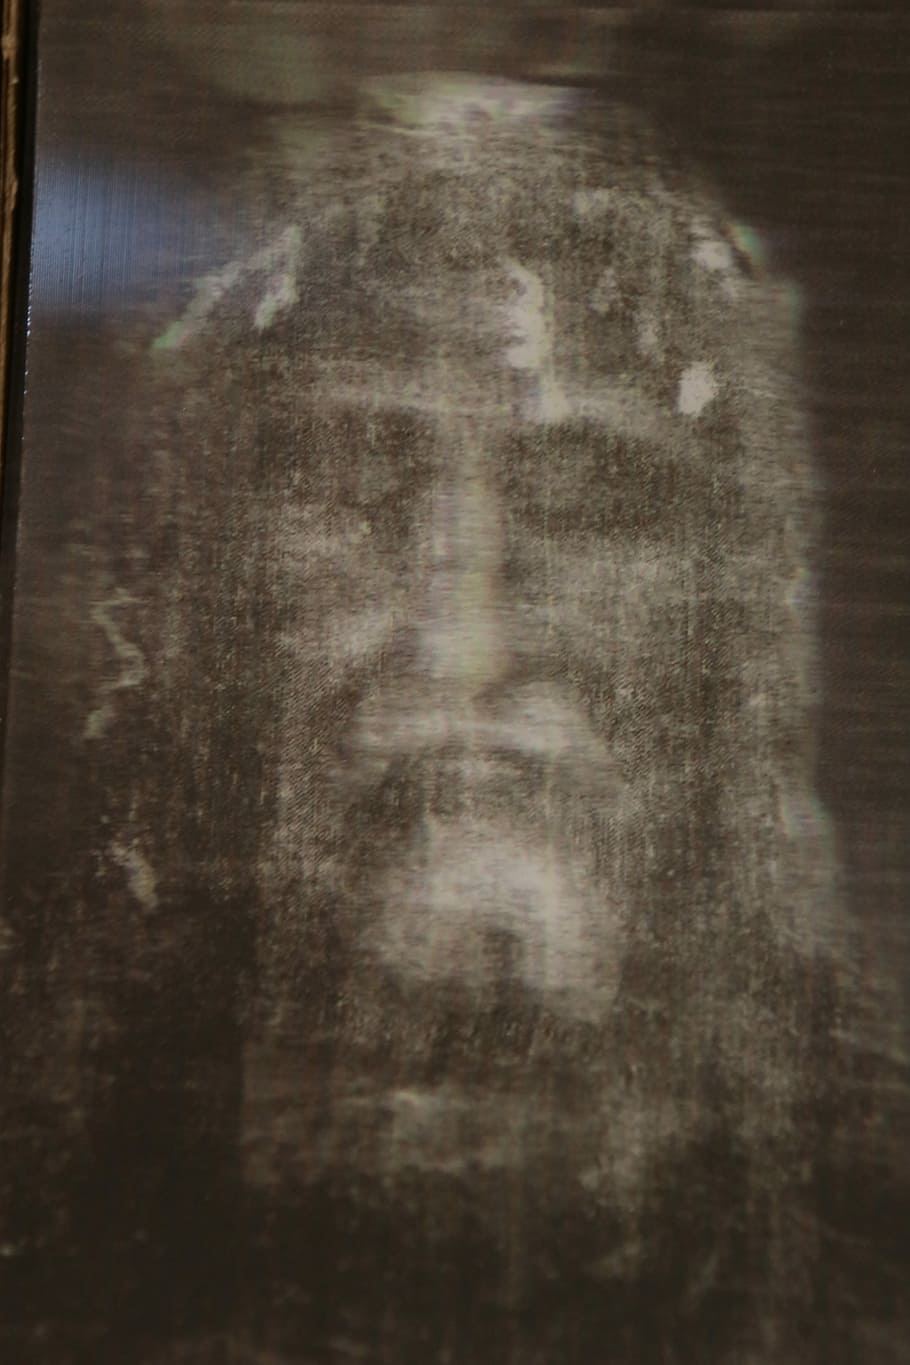 Turin, Grave, Cloth, Torture, Rome, turin grave cloth, resurrection, christ, crucifixion, christianity